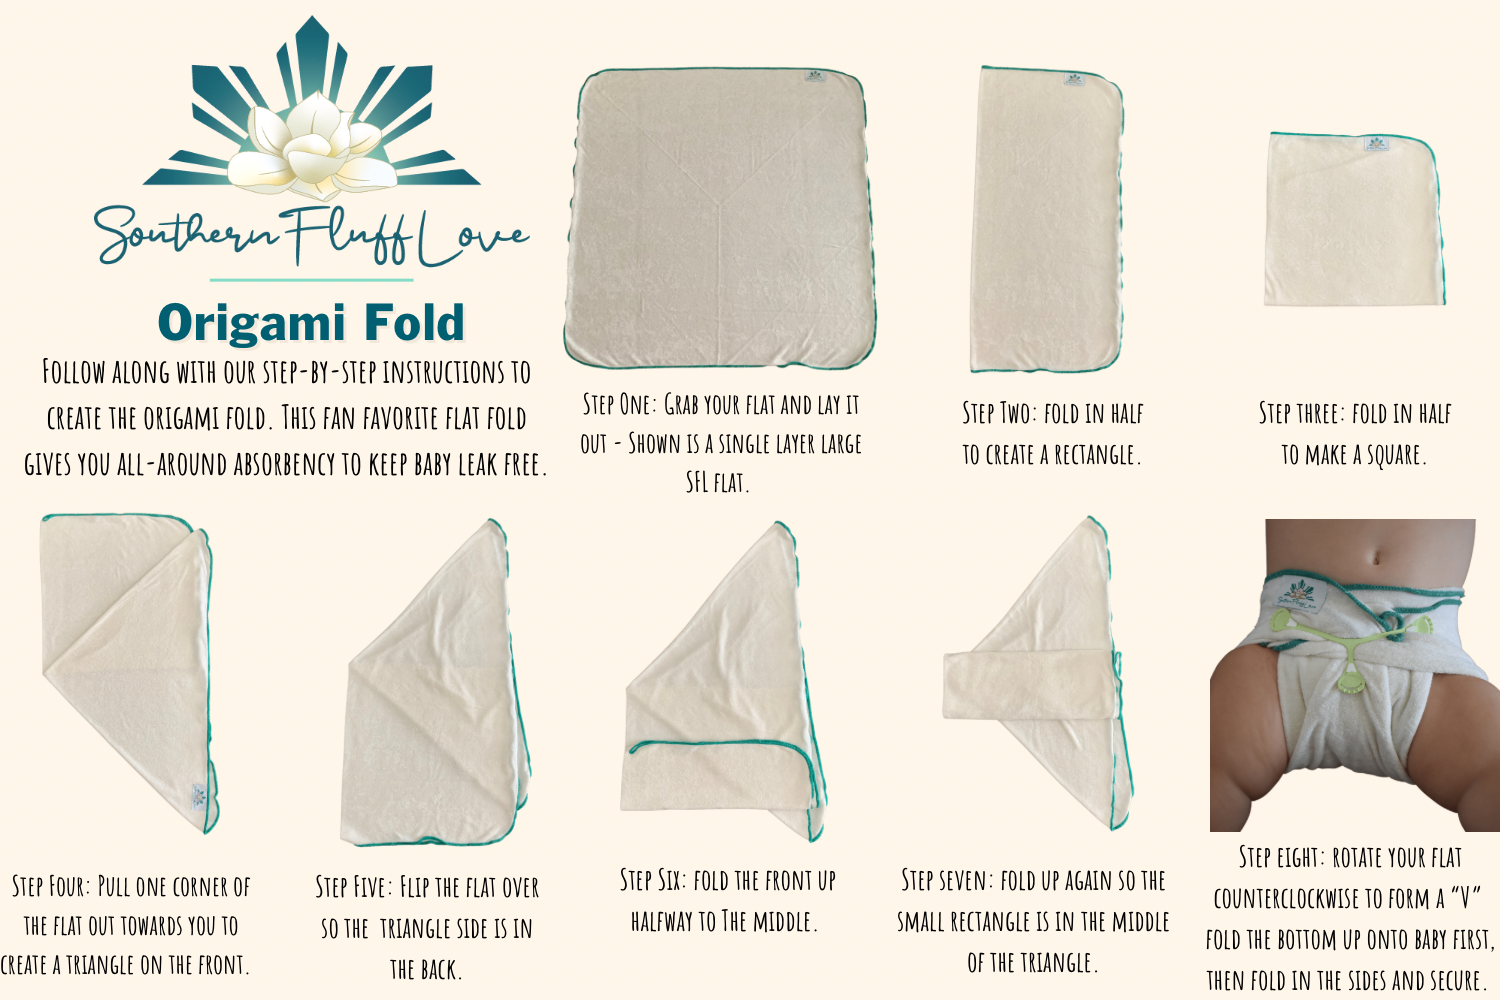 How to Origami Fold a Flat